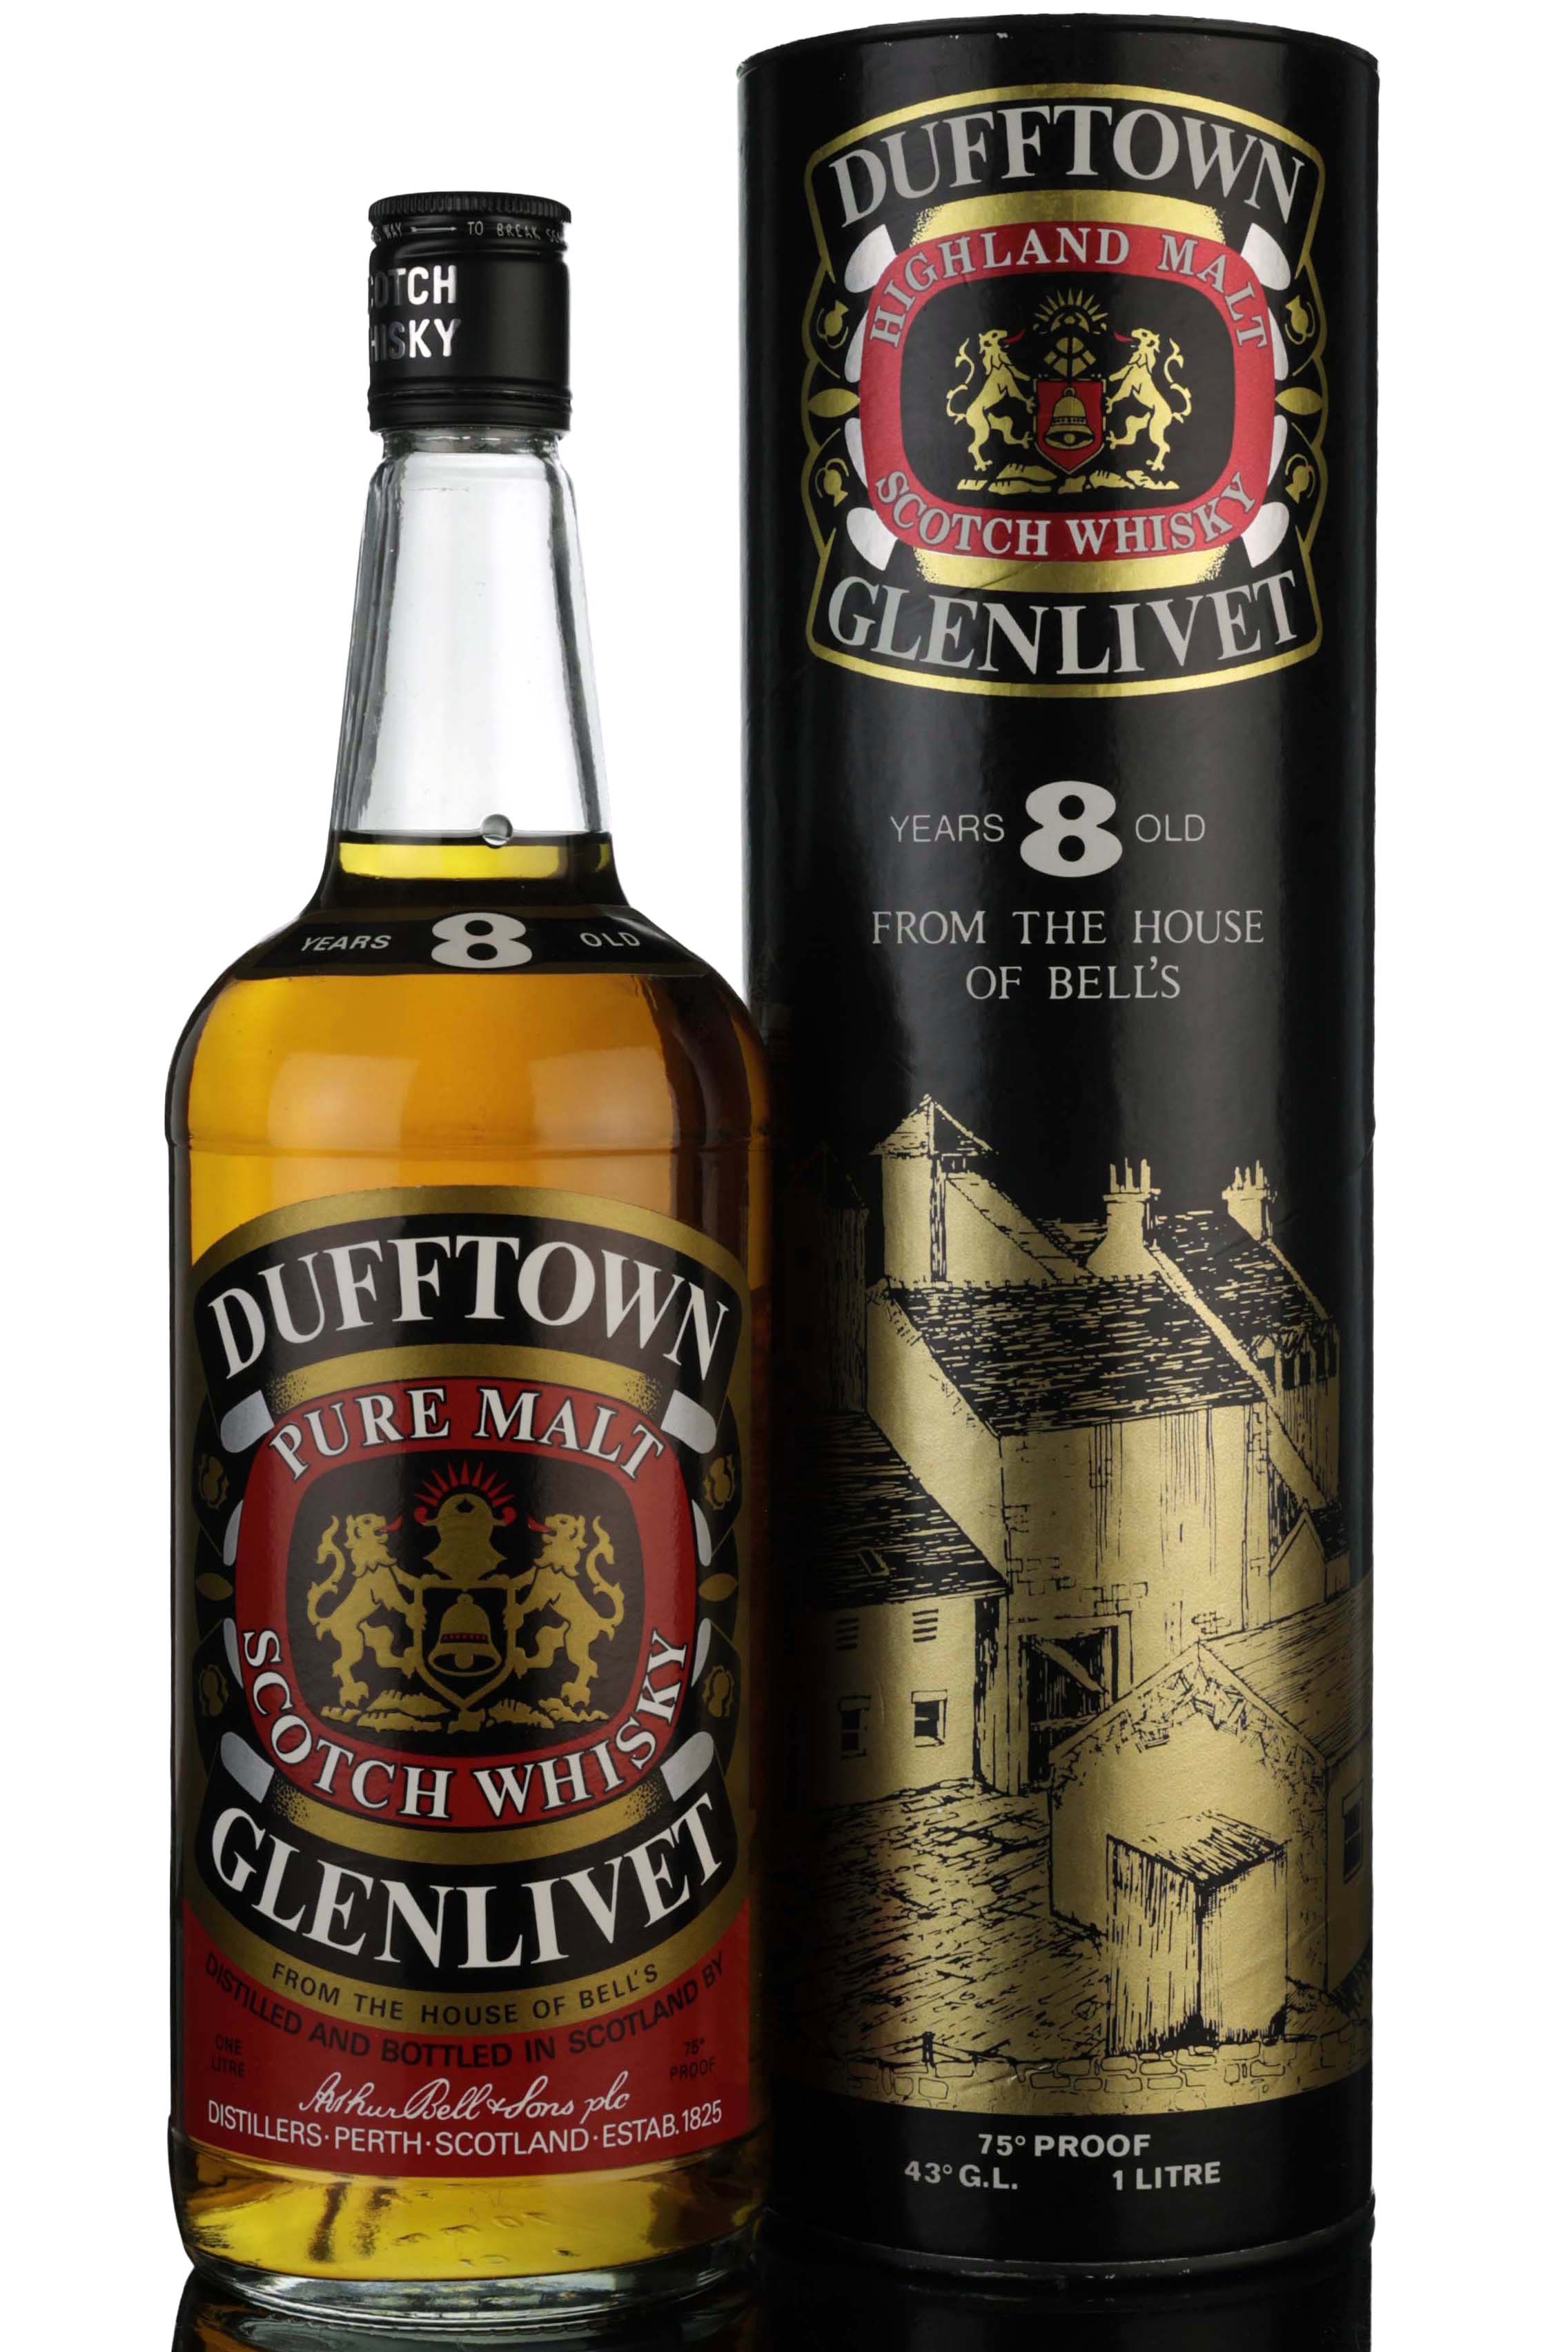 Dufftown 8 Year Old - 1970s - 1 Litre